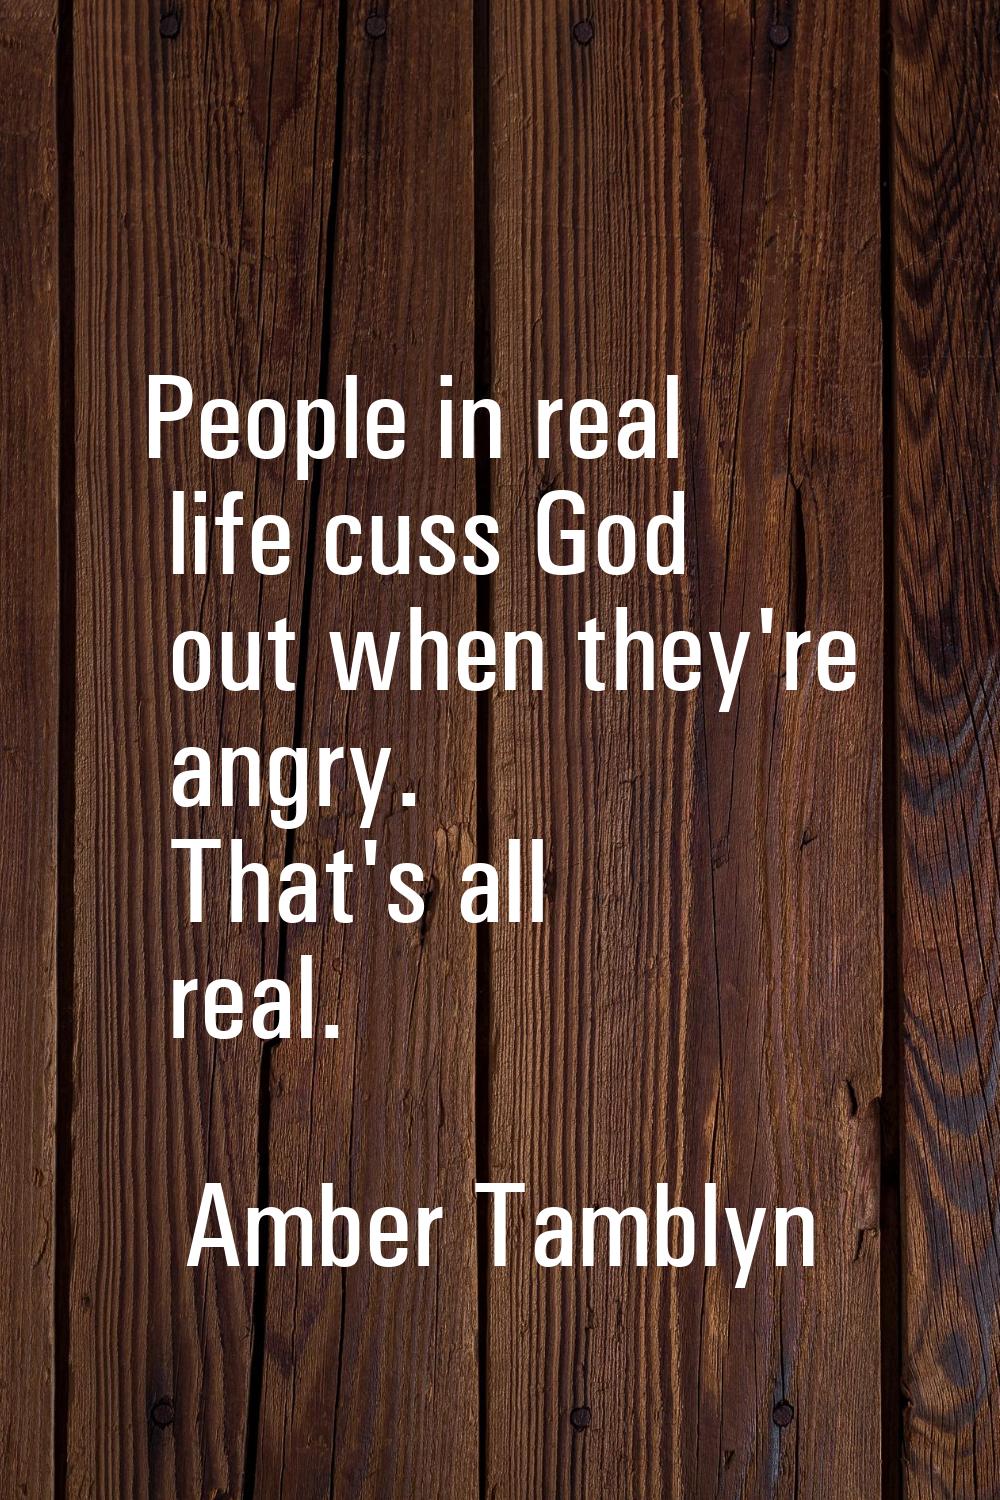 People in real life cuss God out when they're angry. That's all real.